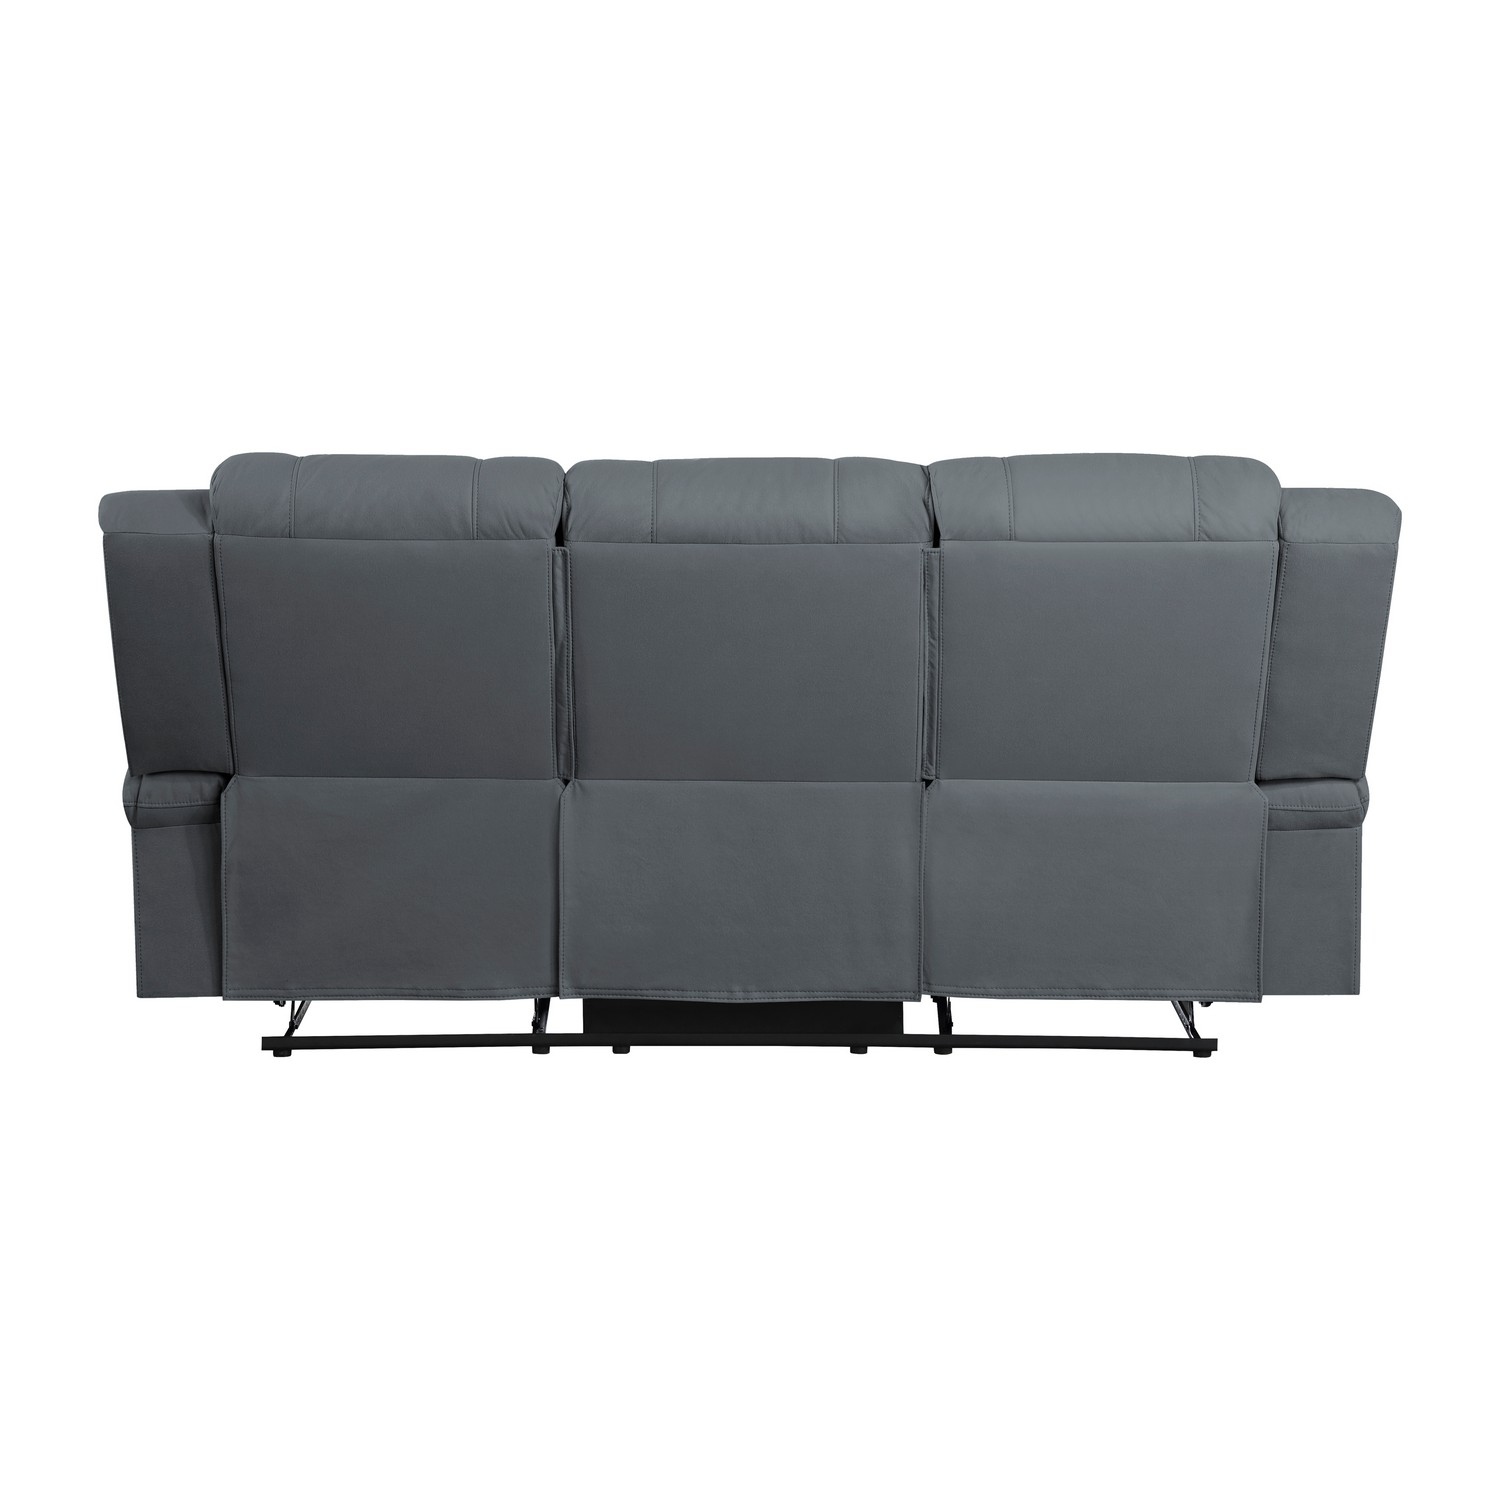 Homelegance Camryn Double Reclining Sofa - Graphite blue